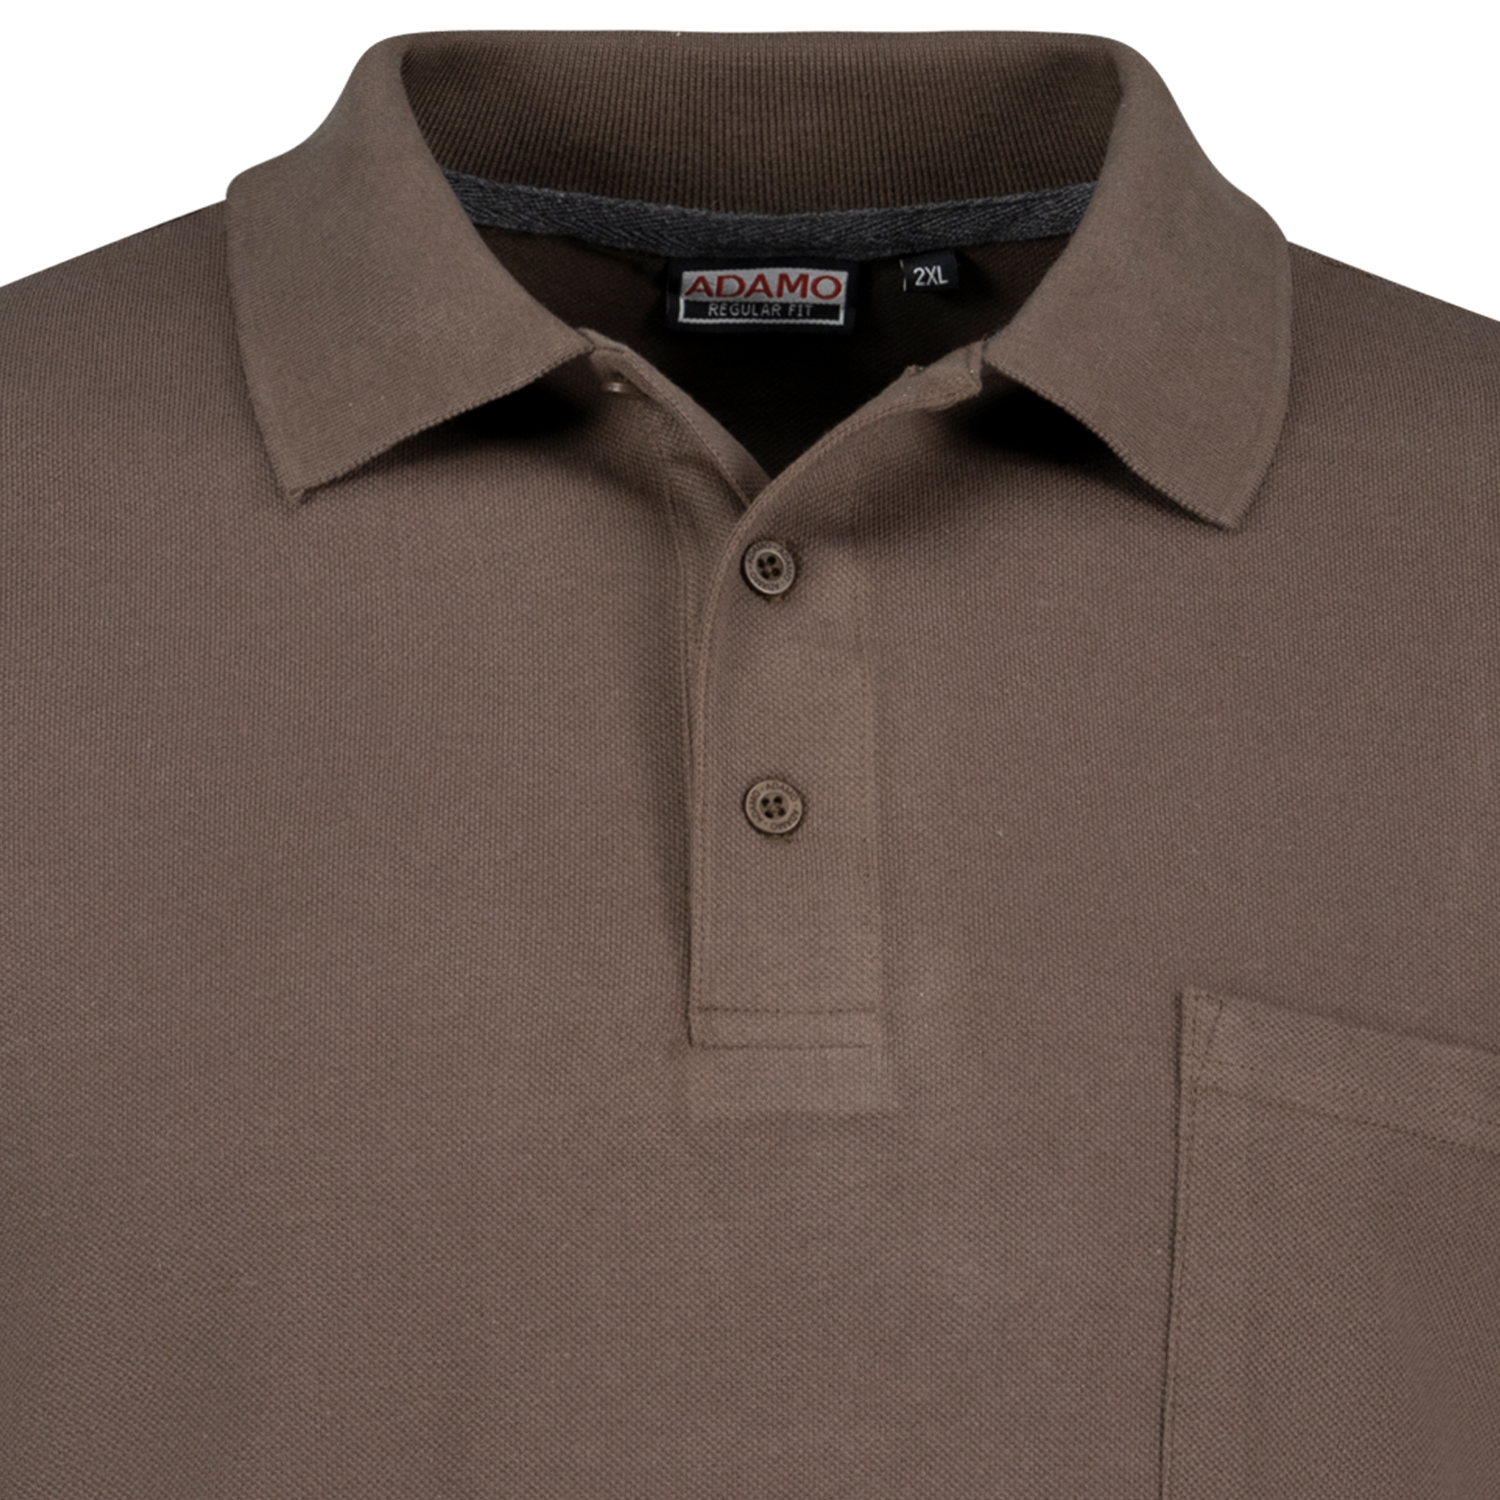 Short sleeve polo shirt REGULAR FIT series Keno by Adamo in brown up to oversize 10XL